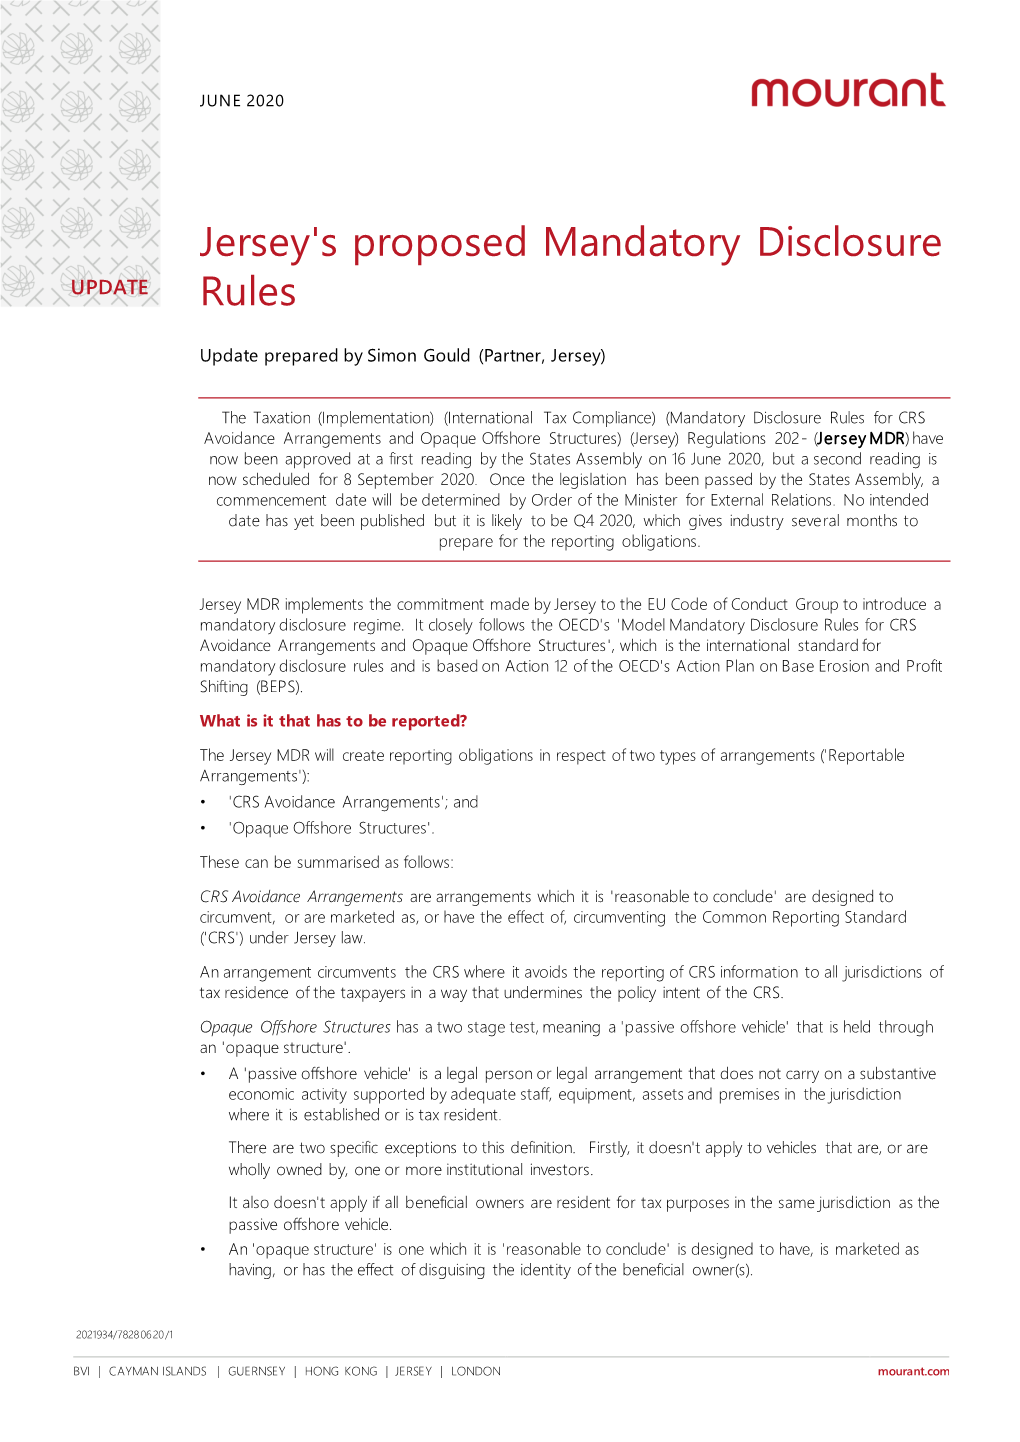 Jersey's Proposed Mandatory Disclosure Rules